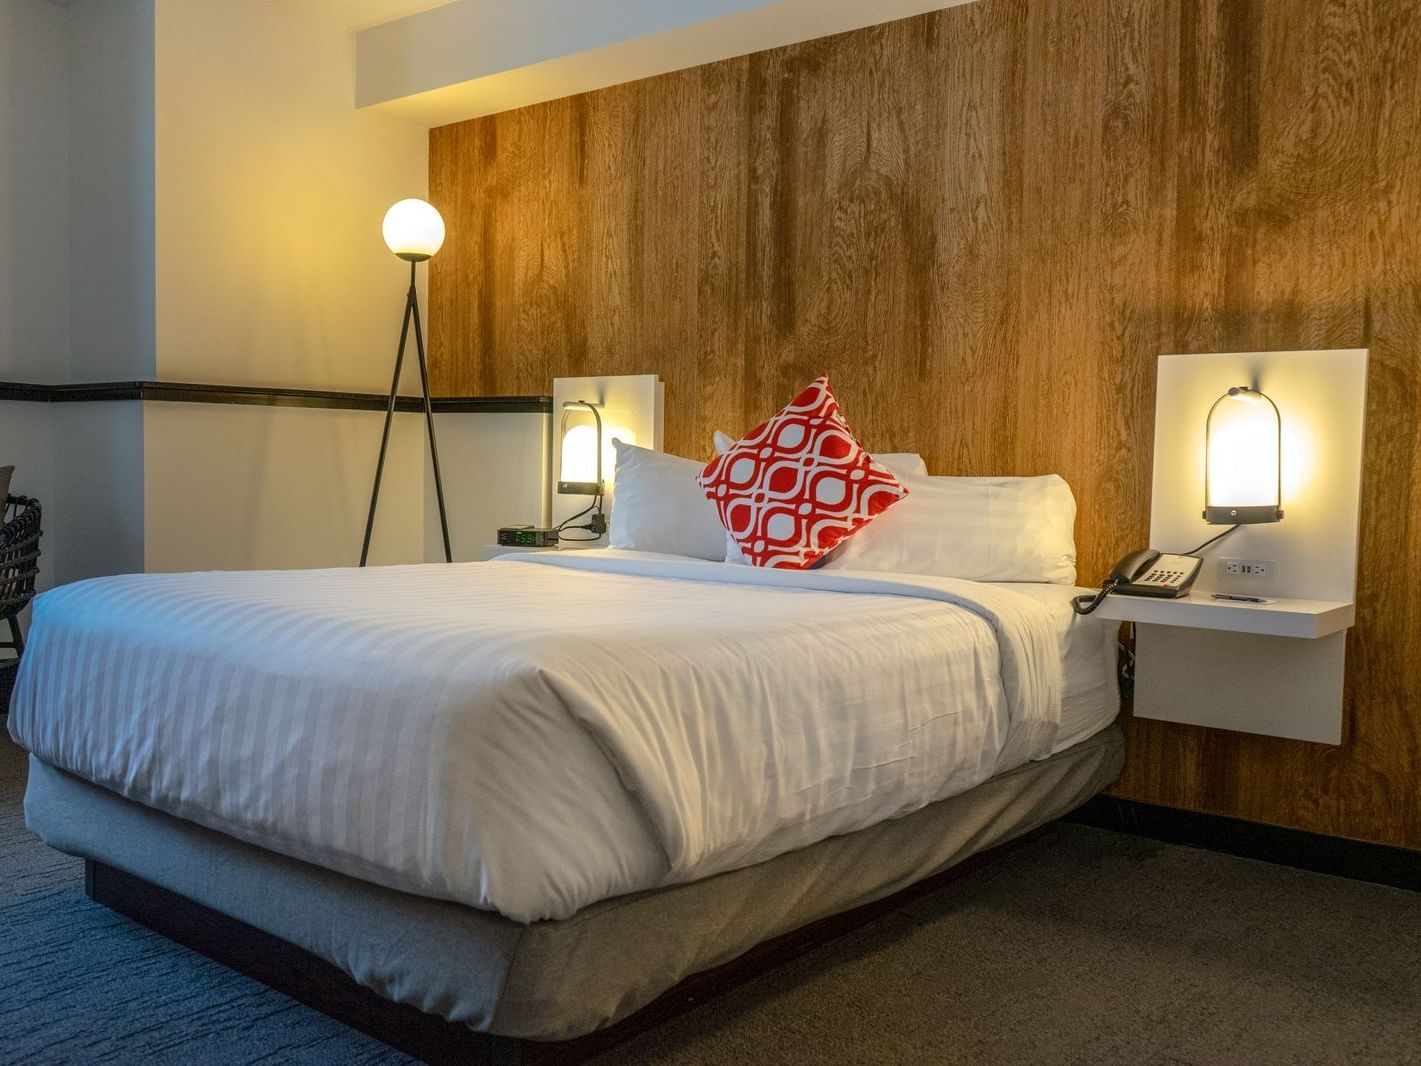 Bed in hotel room with wooden walls